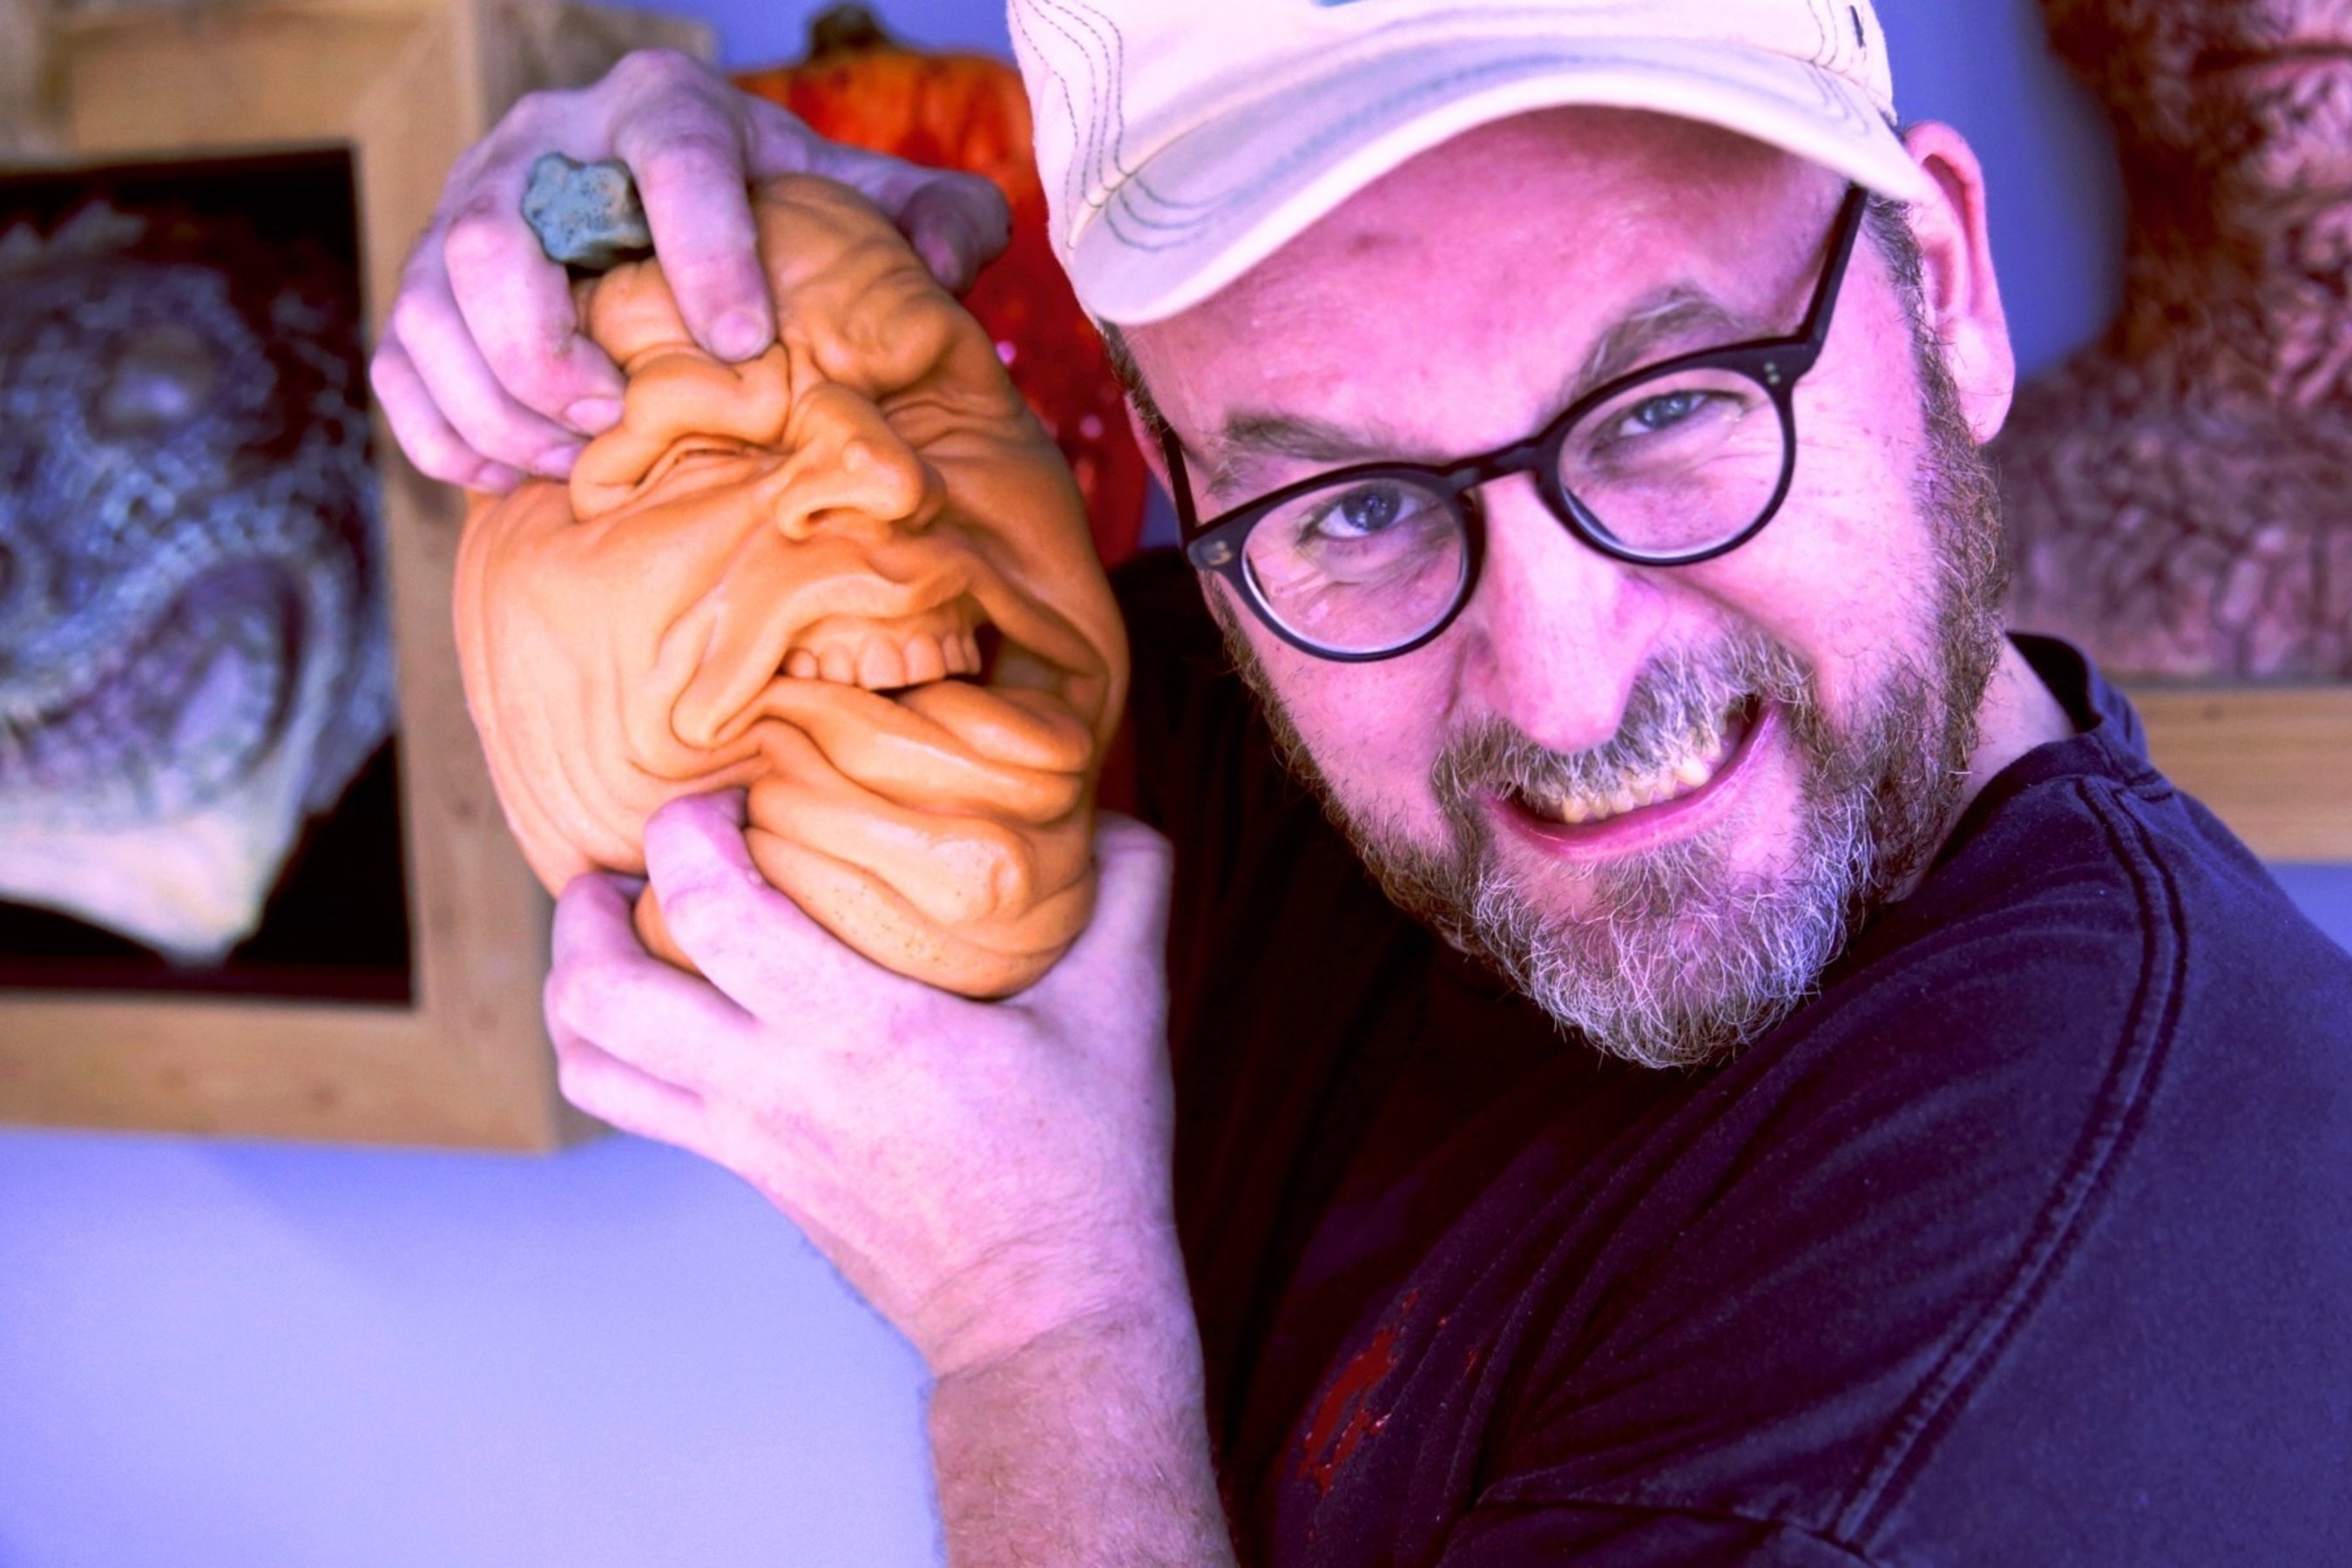 Hollywood Special Effects Artist Todd Masters Poses With One Of His "Oh Lantern Family" Halloween Pumpkin Toys